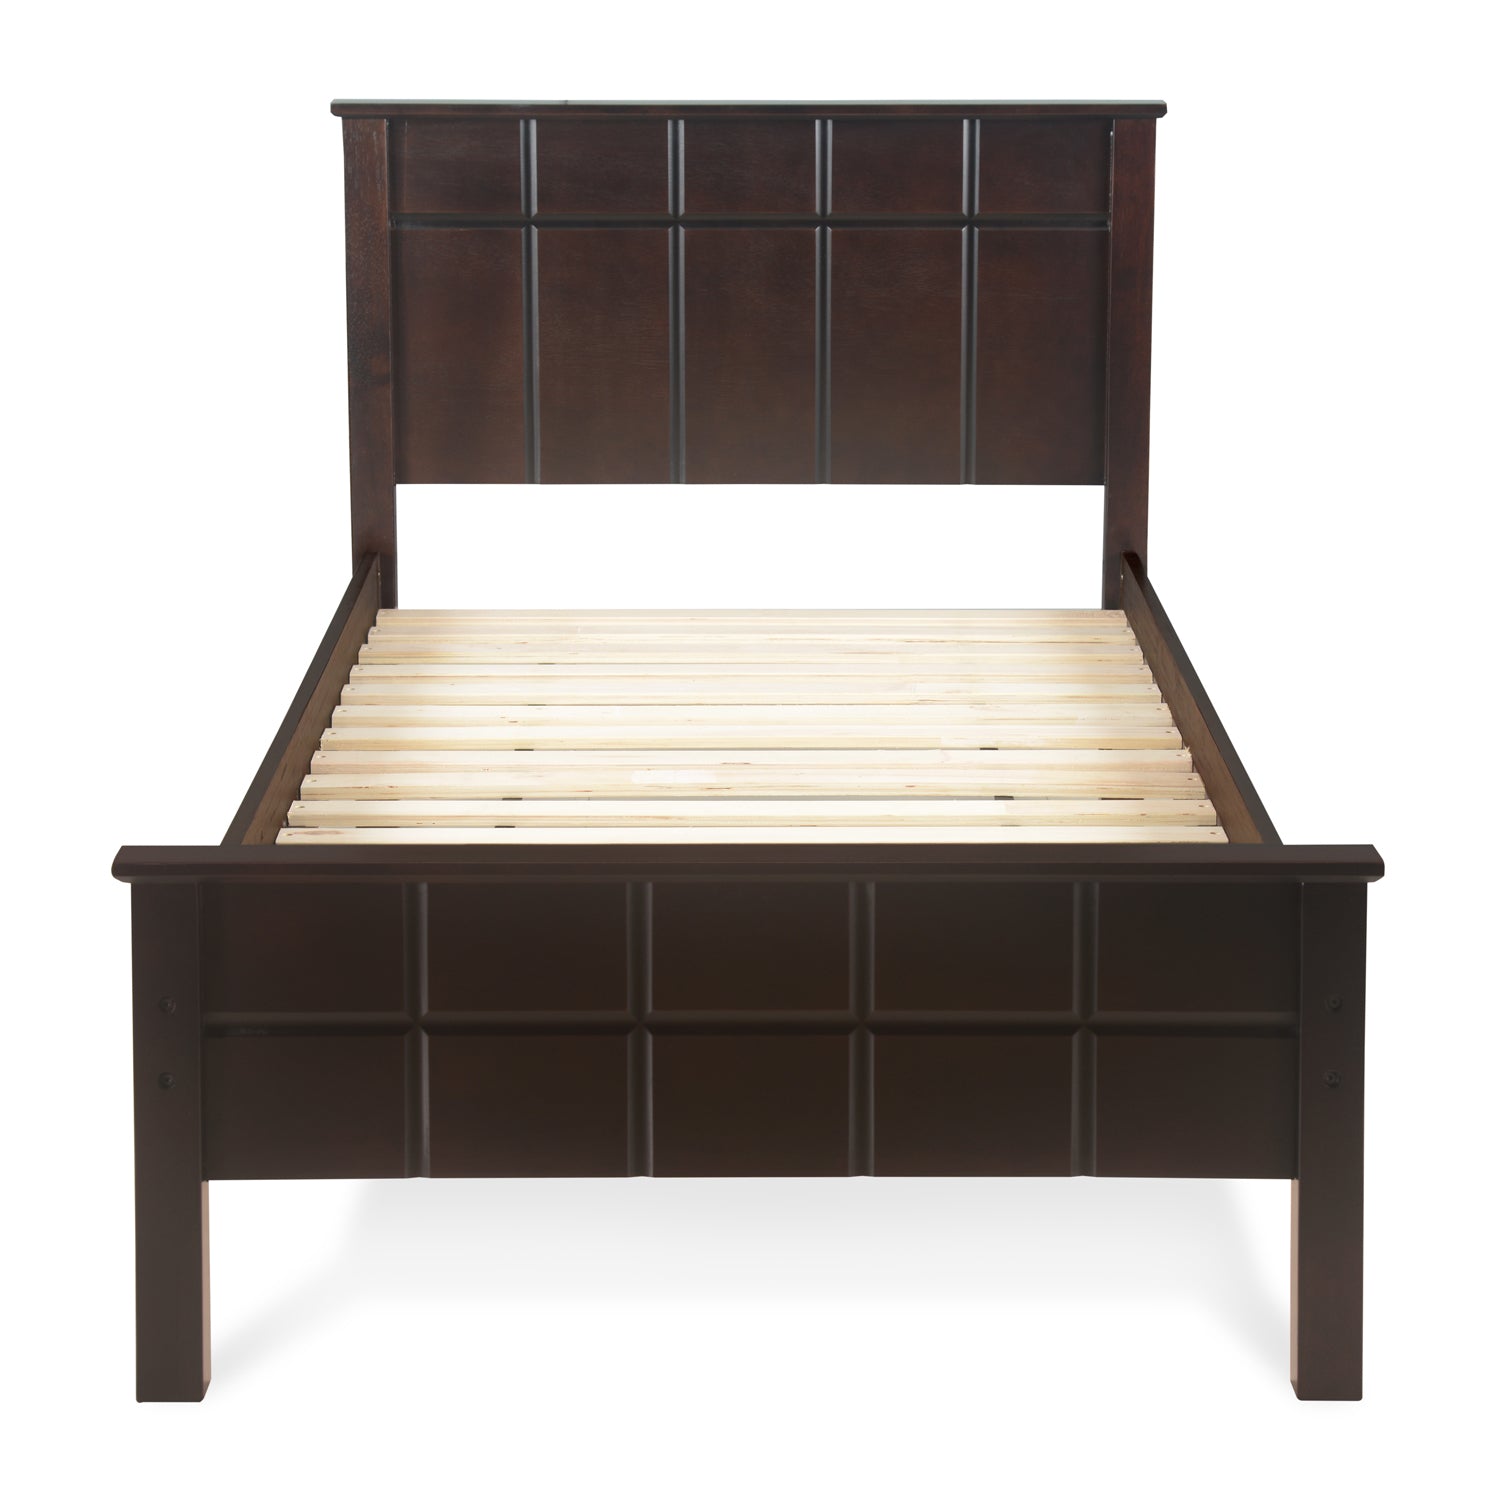 Cipher Single Bed Without Storage (Espresso)